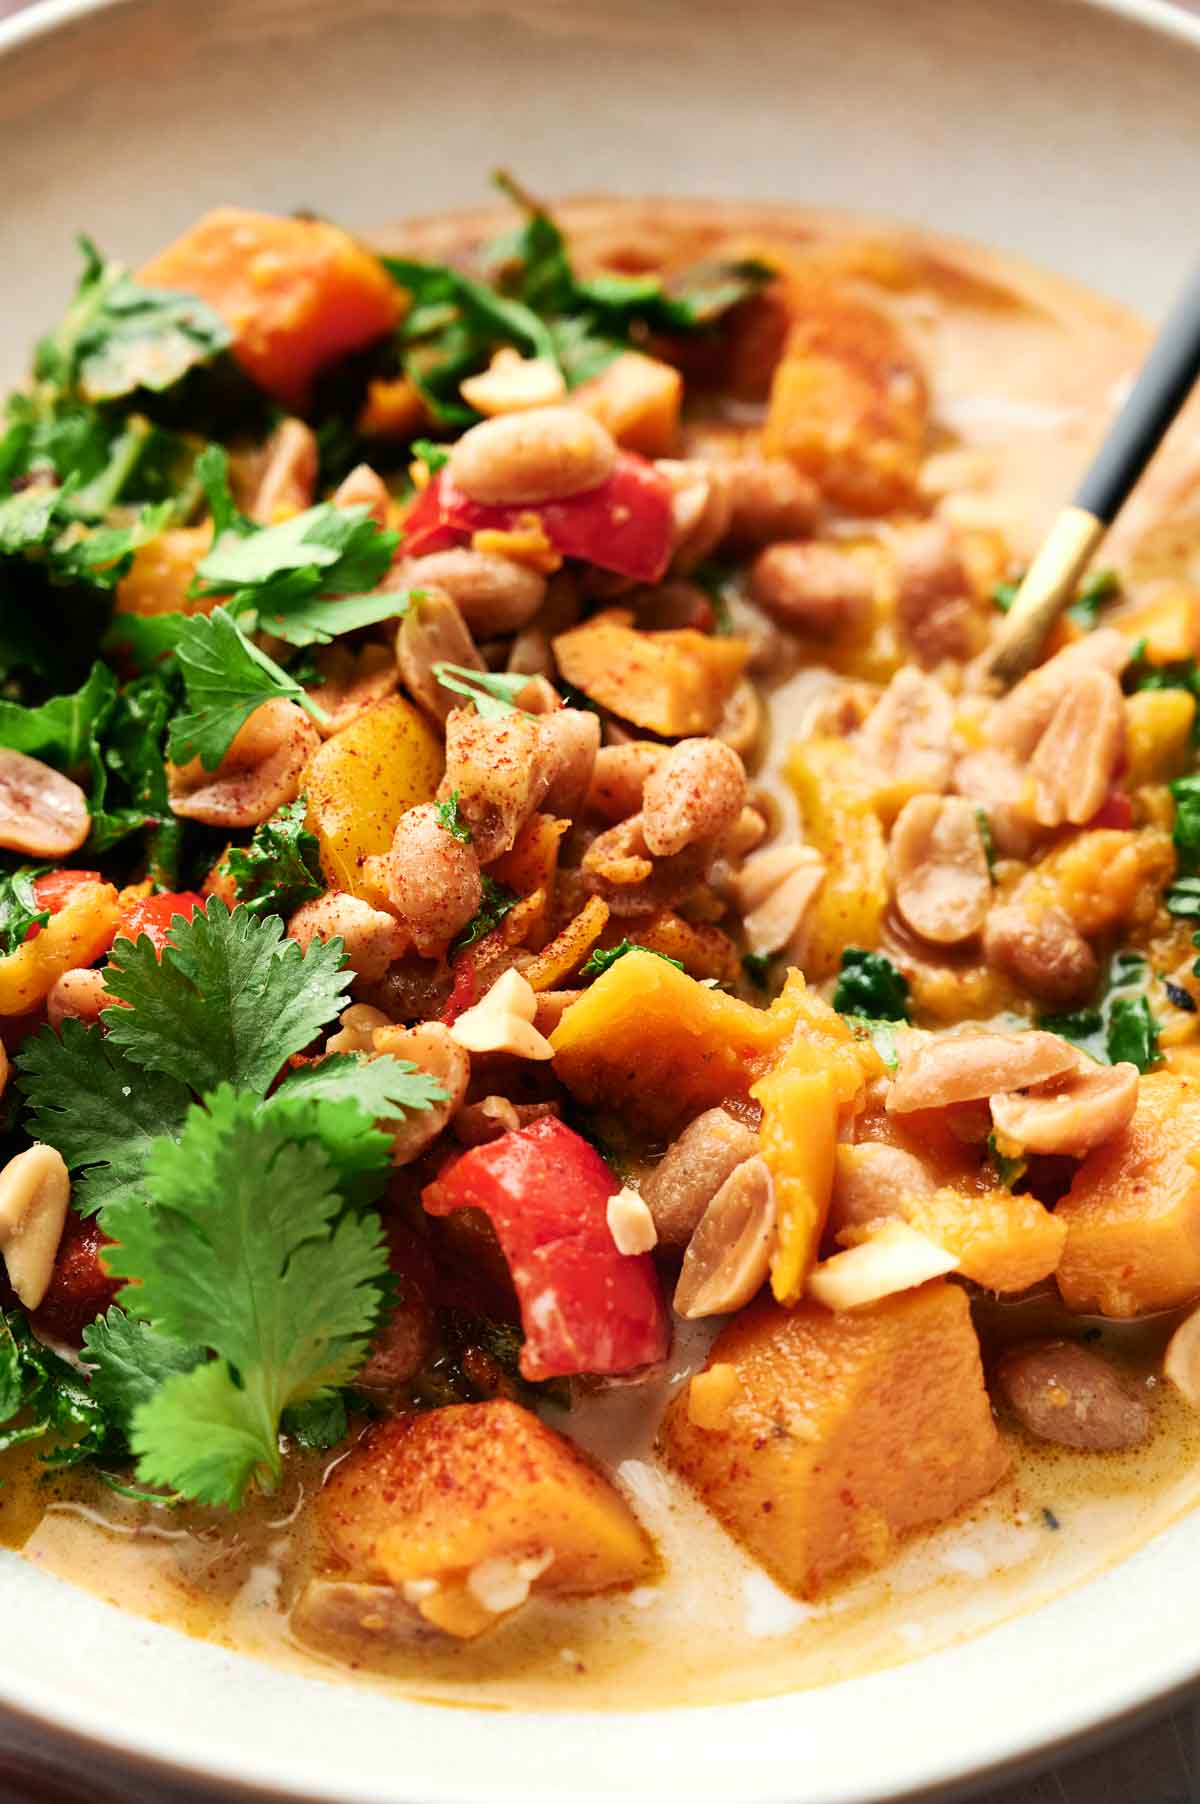 A delicious and flavorful Thai peanut curry dish that combines the natural sweetness of sweet potatoes with the bold flavors of peanuts and fresh cilantro.